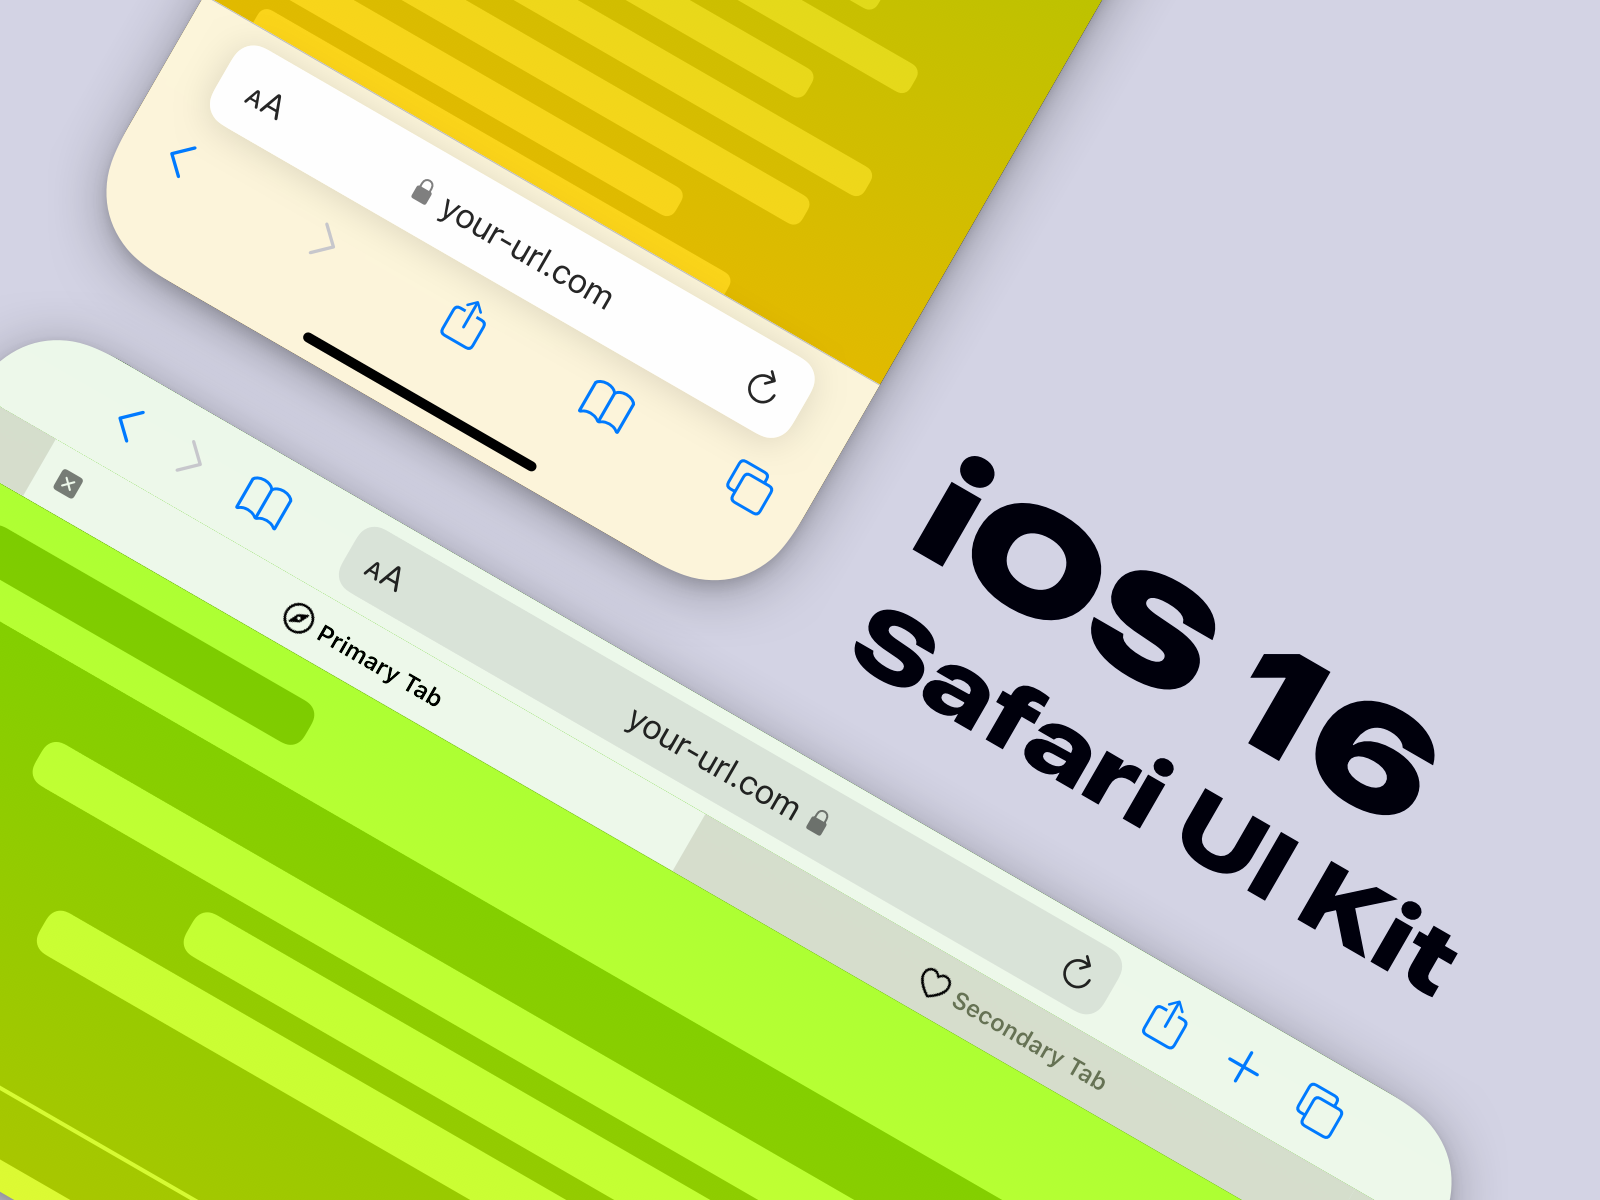 iOS 93 iPhone GUI Kit Sketch freebie  Download free resource for Sketch   Sketch App Sources